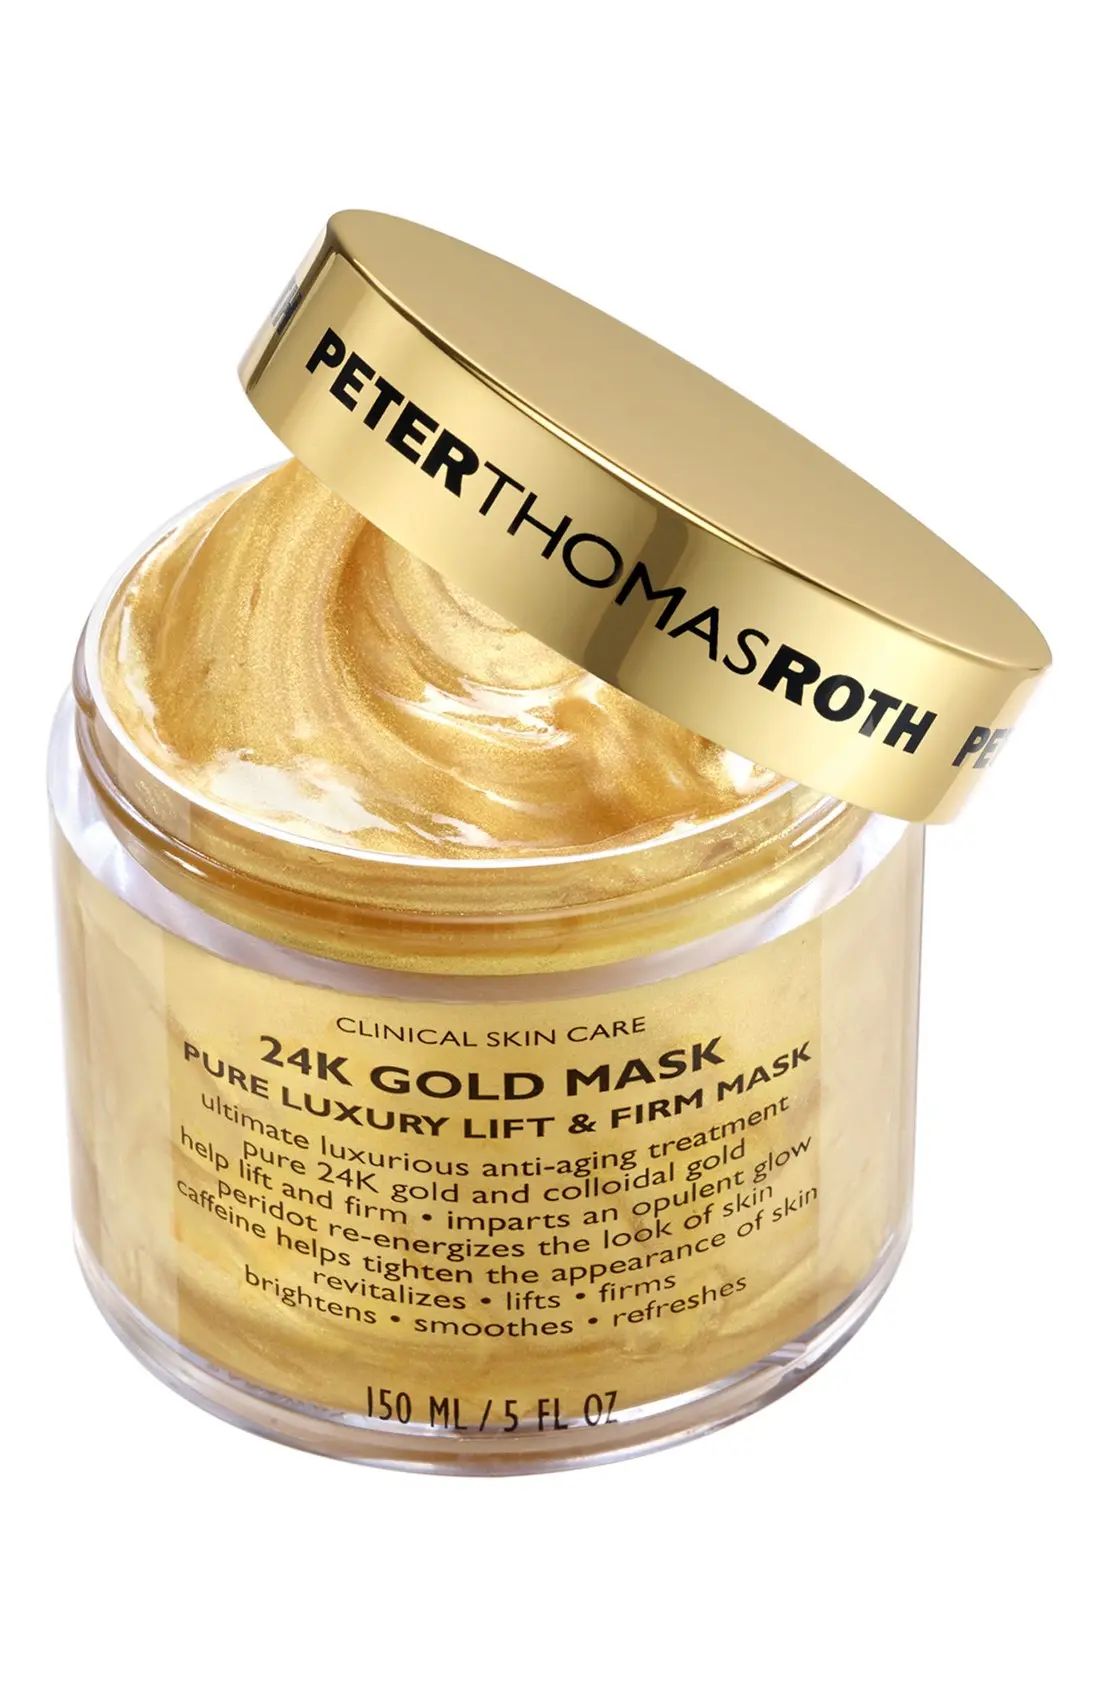 Peter Thomas Roth 24K Gold Mask | Nordstrom